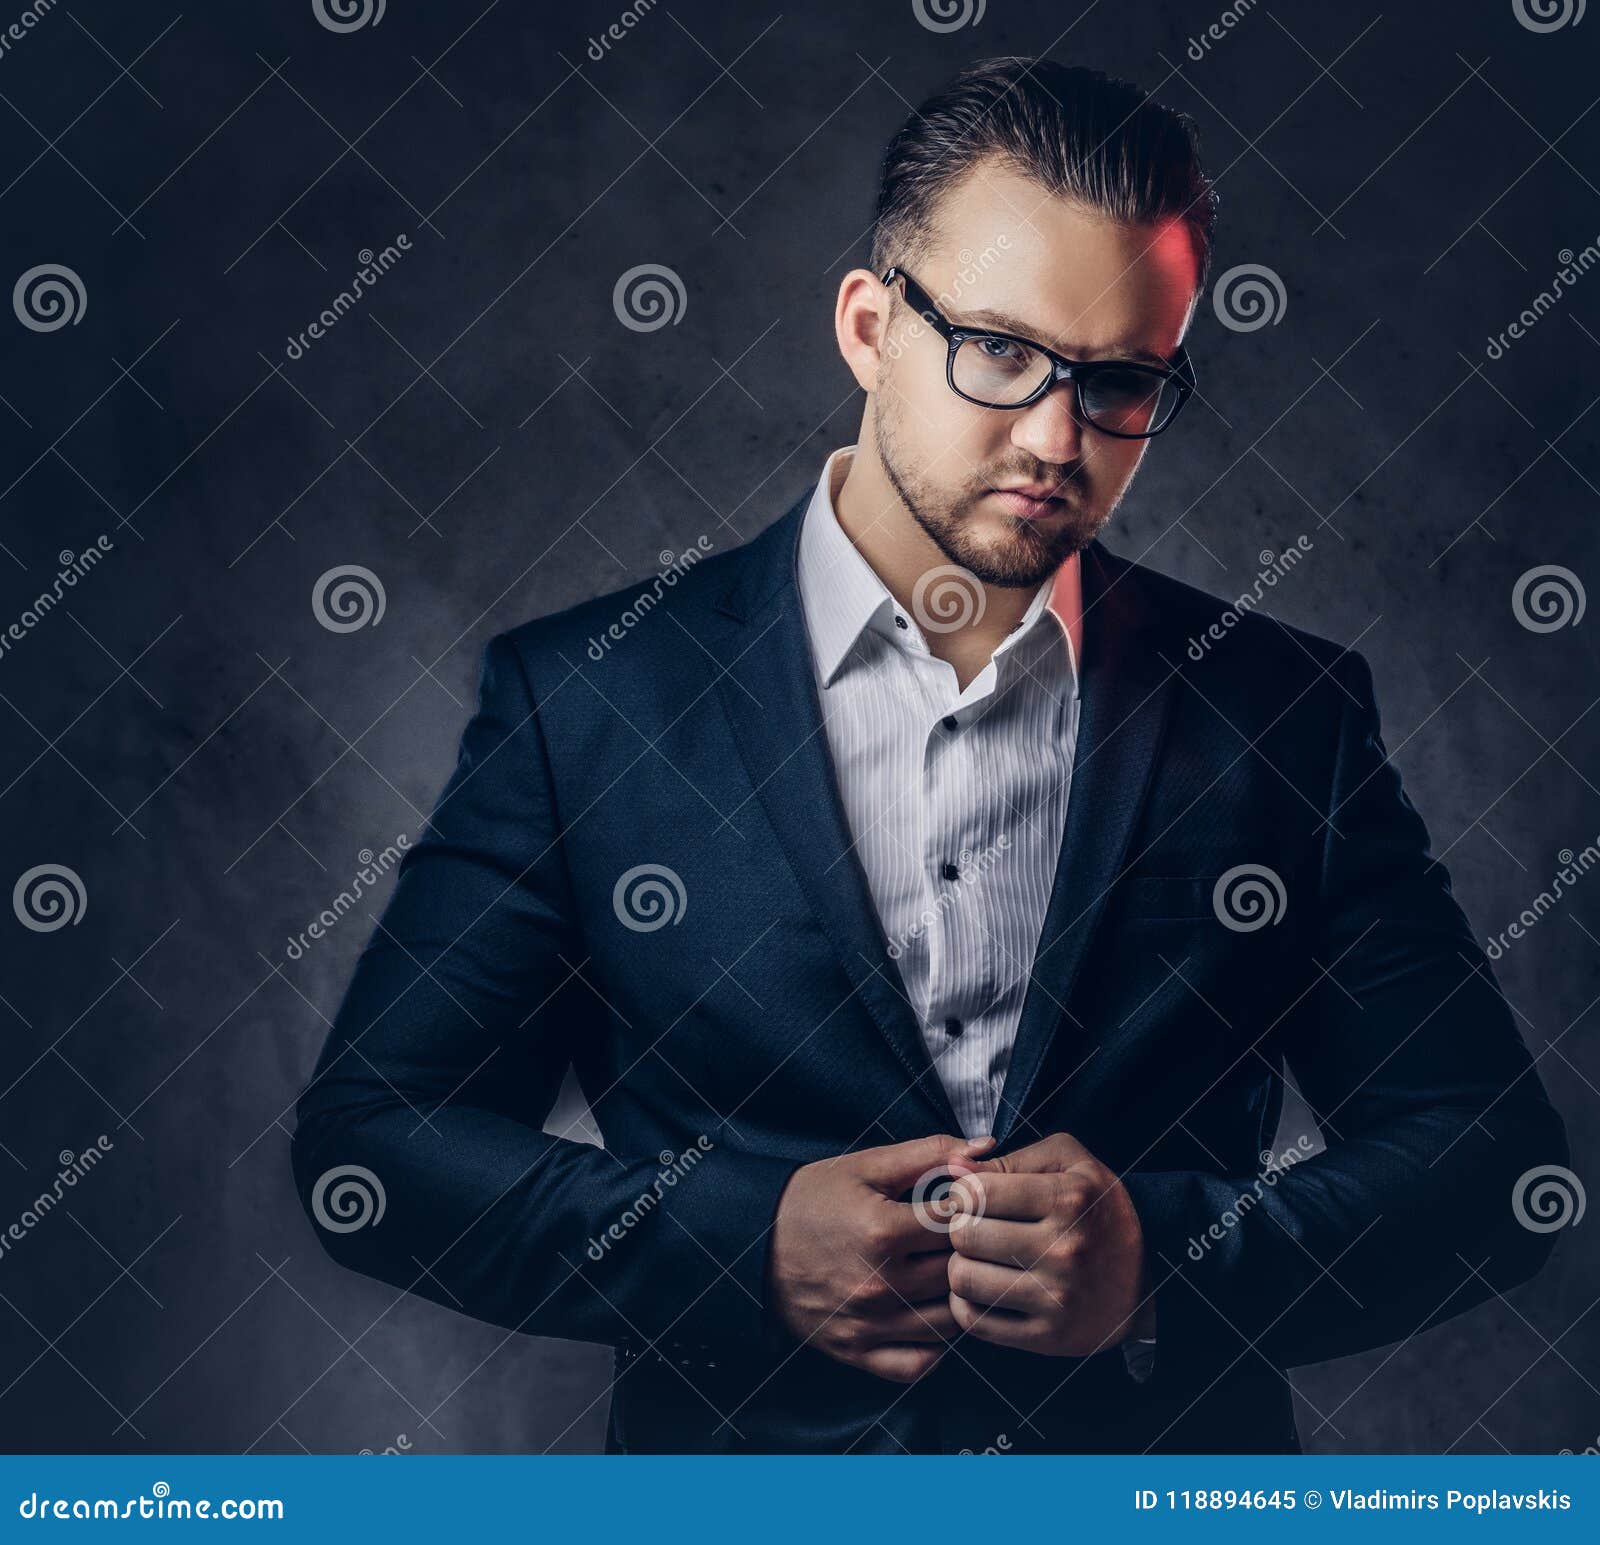 Portrait of a Stylish Businessman with Serious Face in an Elegant ...